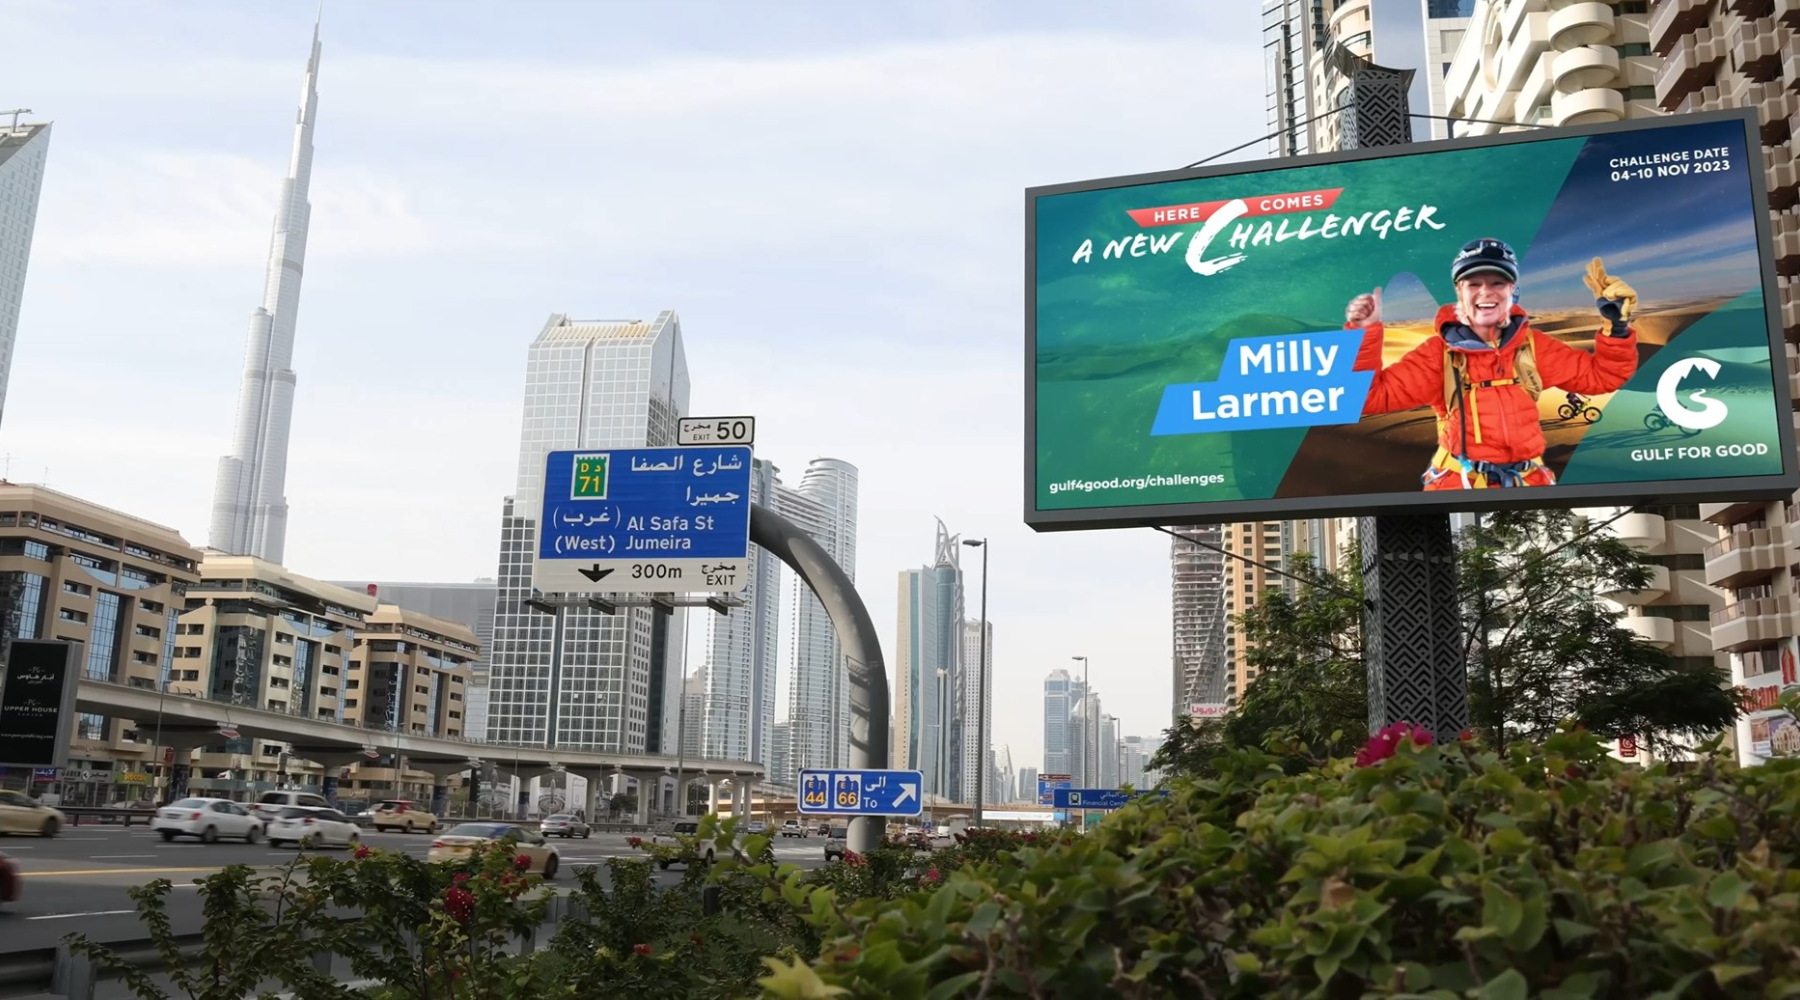 Gulf for Good Unveils ‘Champions of Change’ on Sheikh Zayed Road billboards